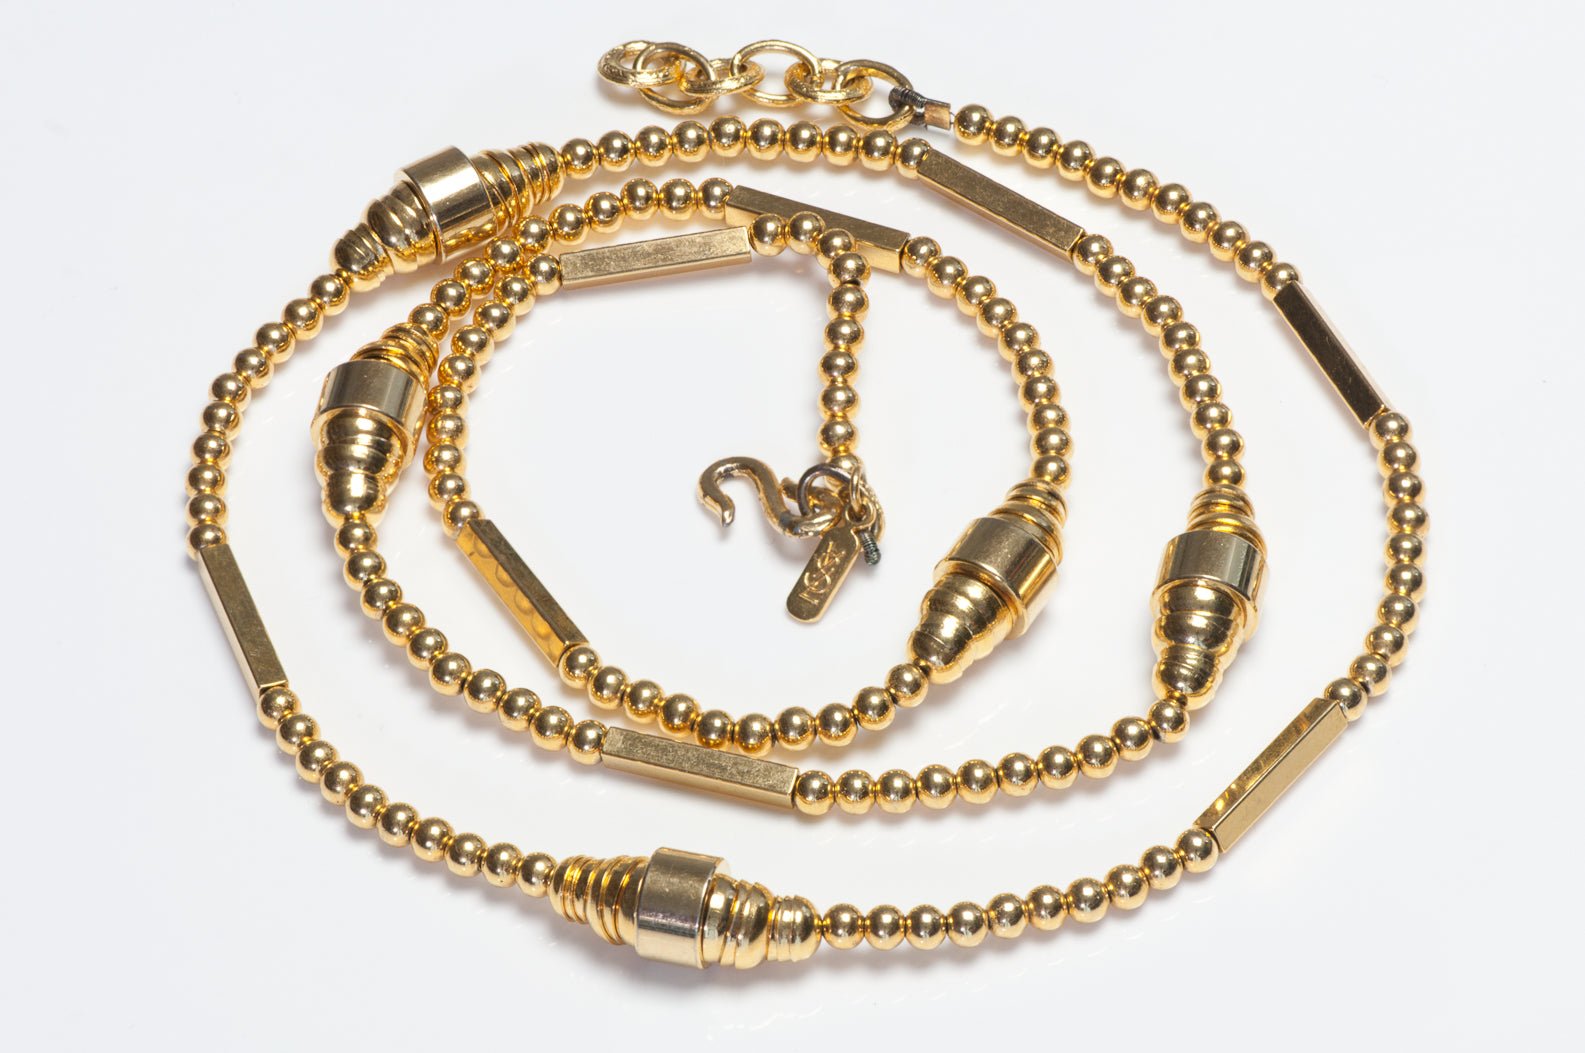 Vintage Yves Saint Laurent YSL Gold Plated Beads Geometric Chain Necklace